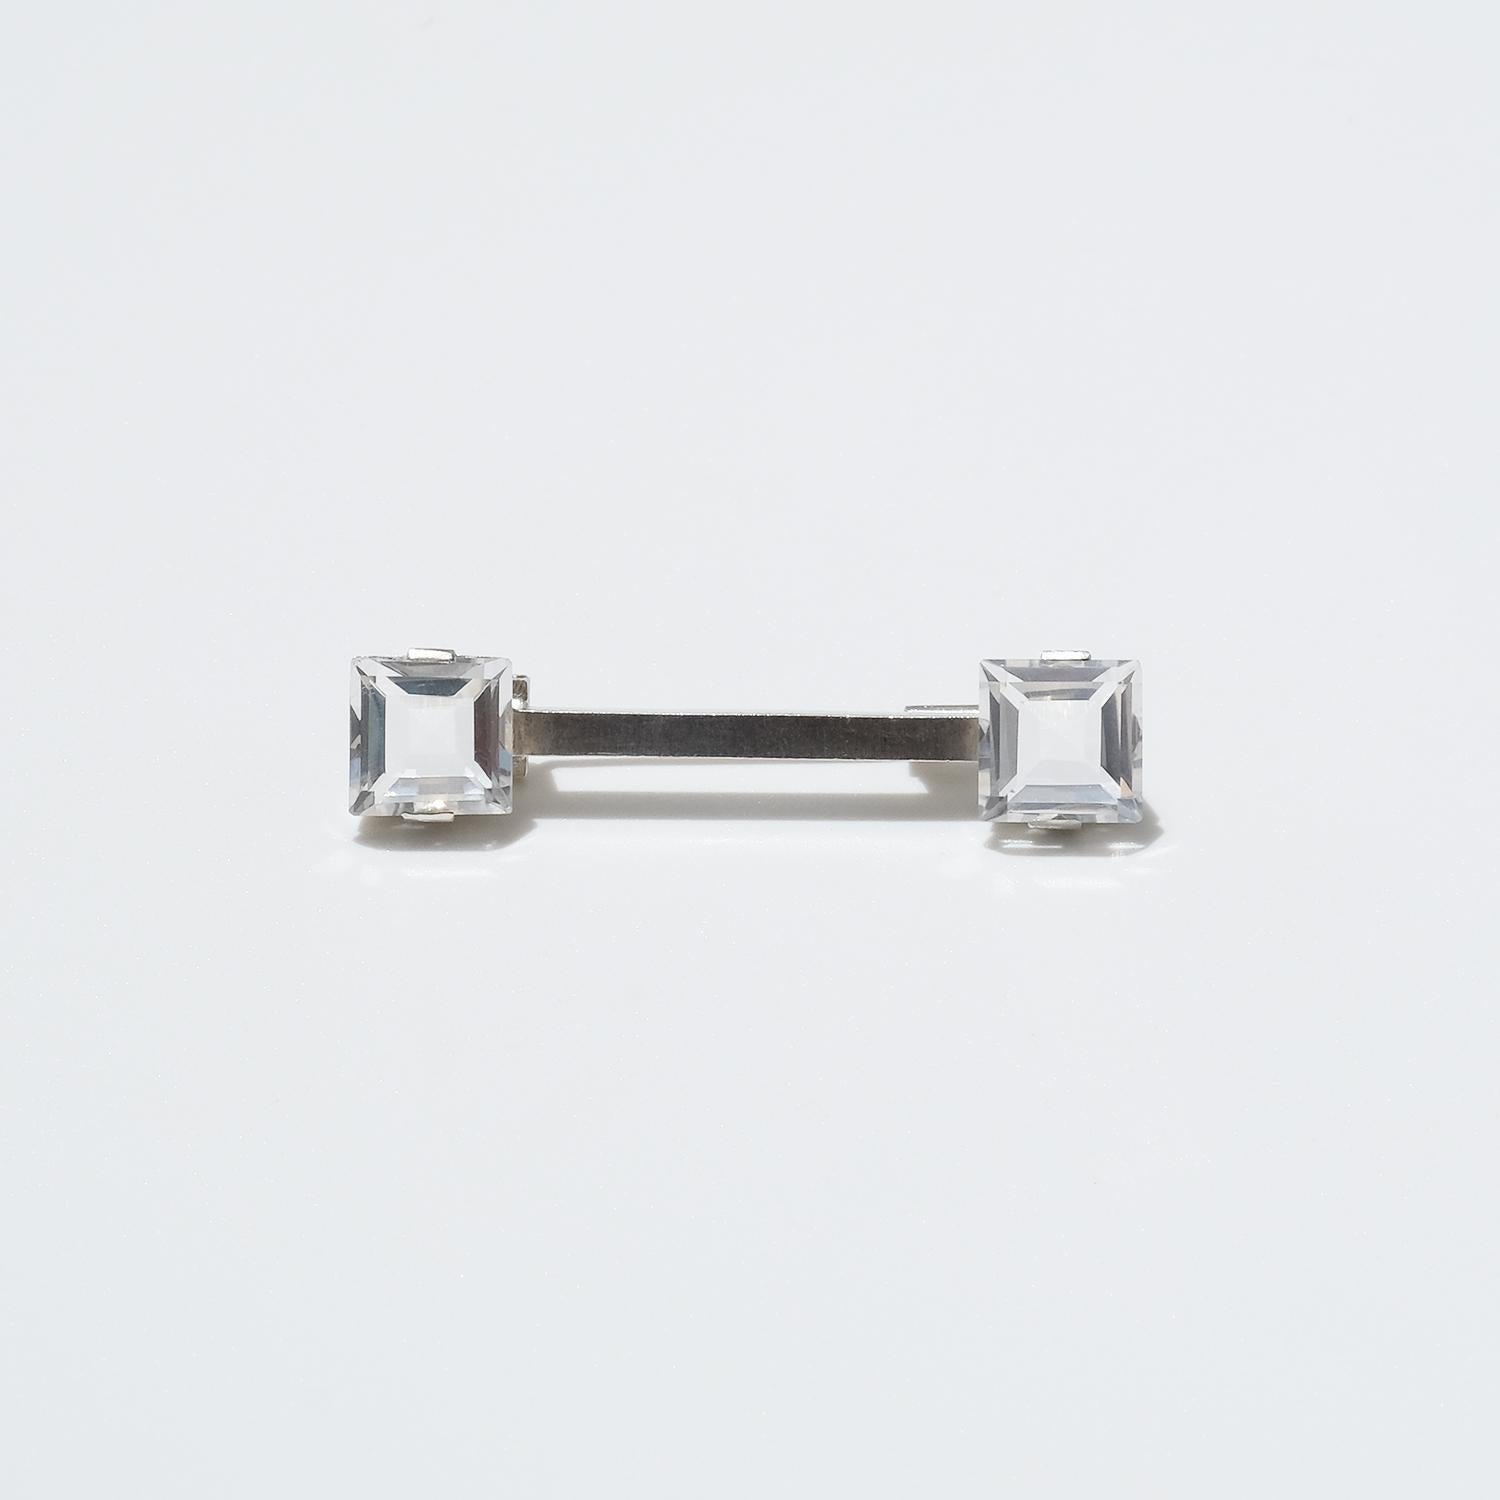 This silver brooch is adorned with one faceted rock crystal on each end. It is fastened easily with a trombone clasp, which were commonly used in jewelery made in the 1940s.

The brooch has a classic look making it available for both a he or a she,